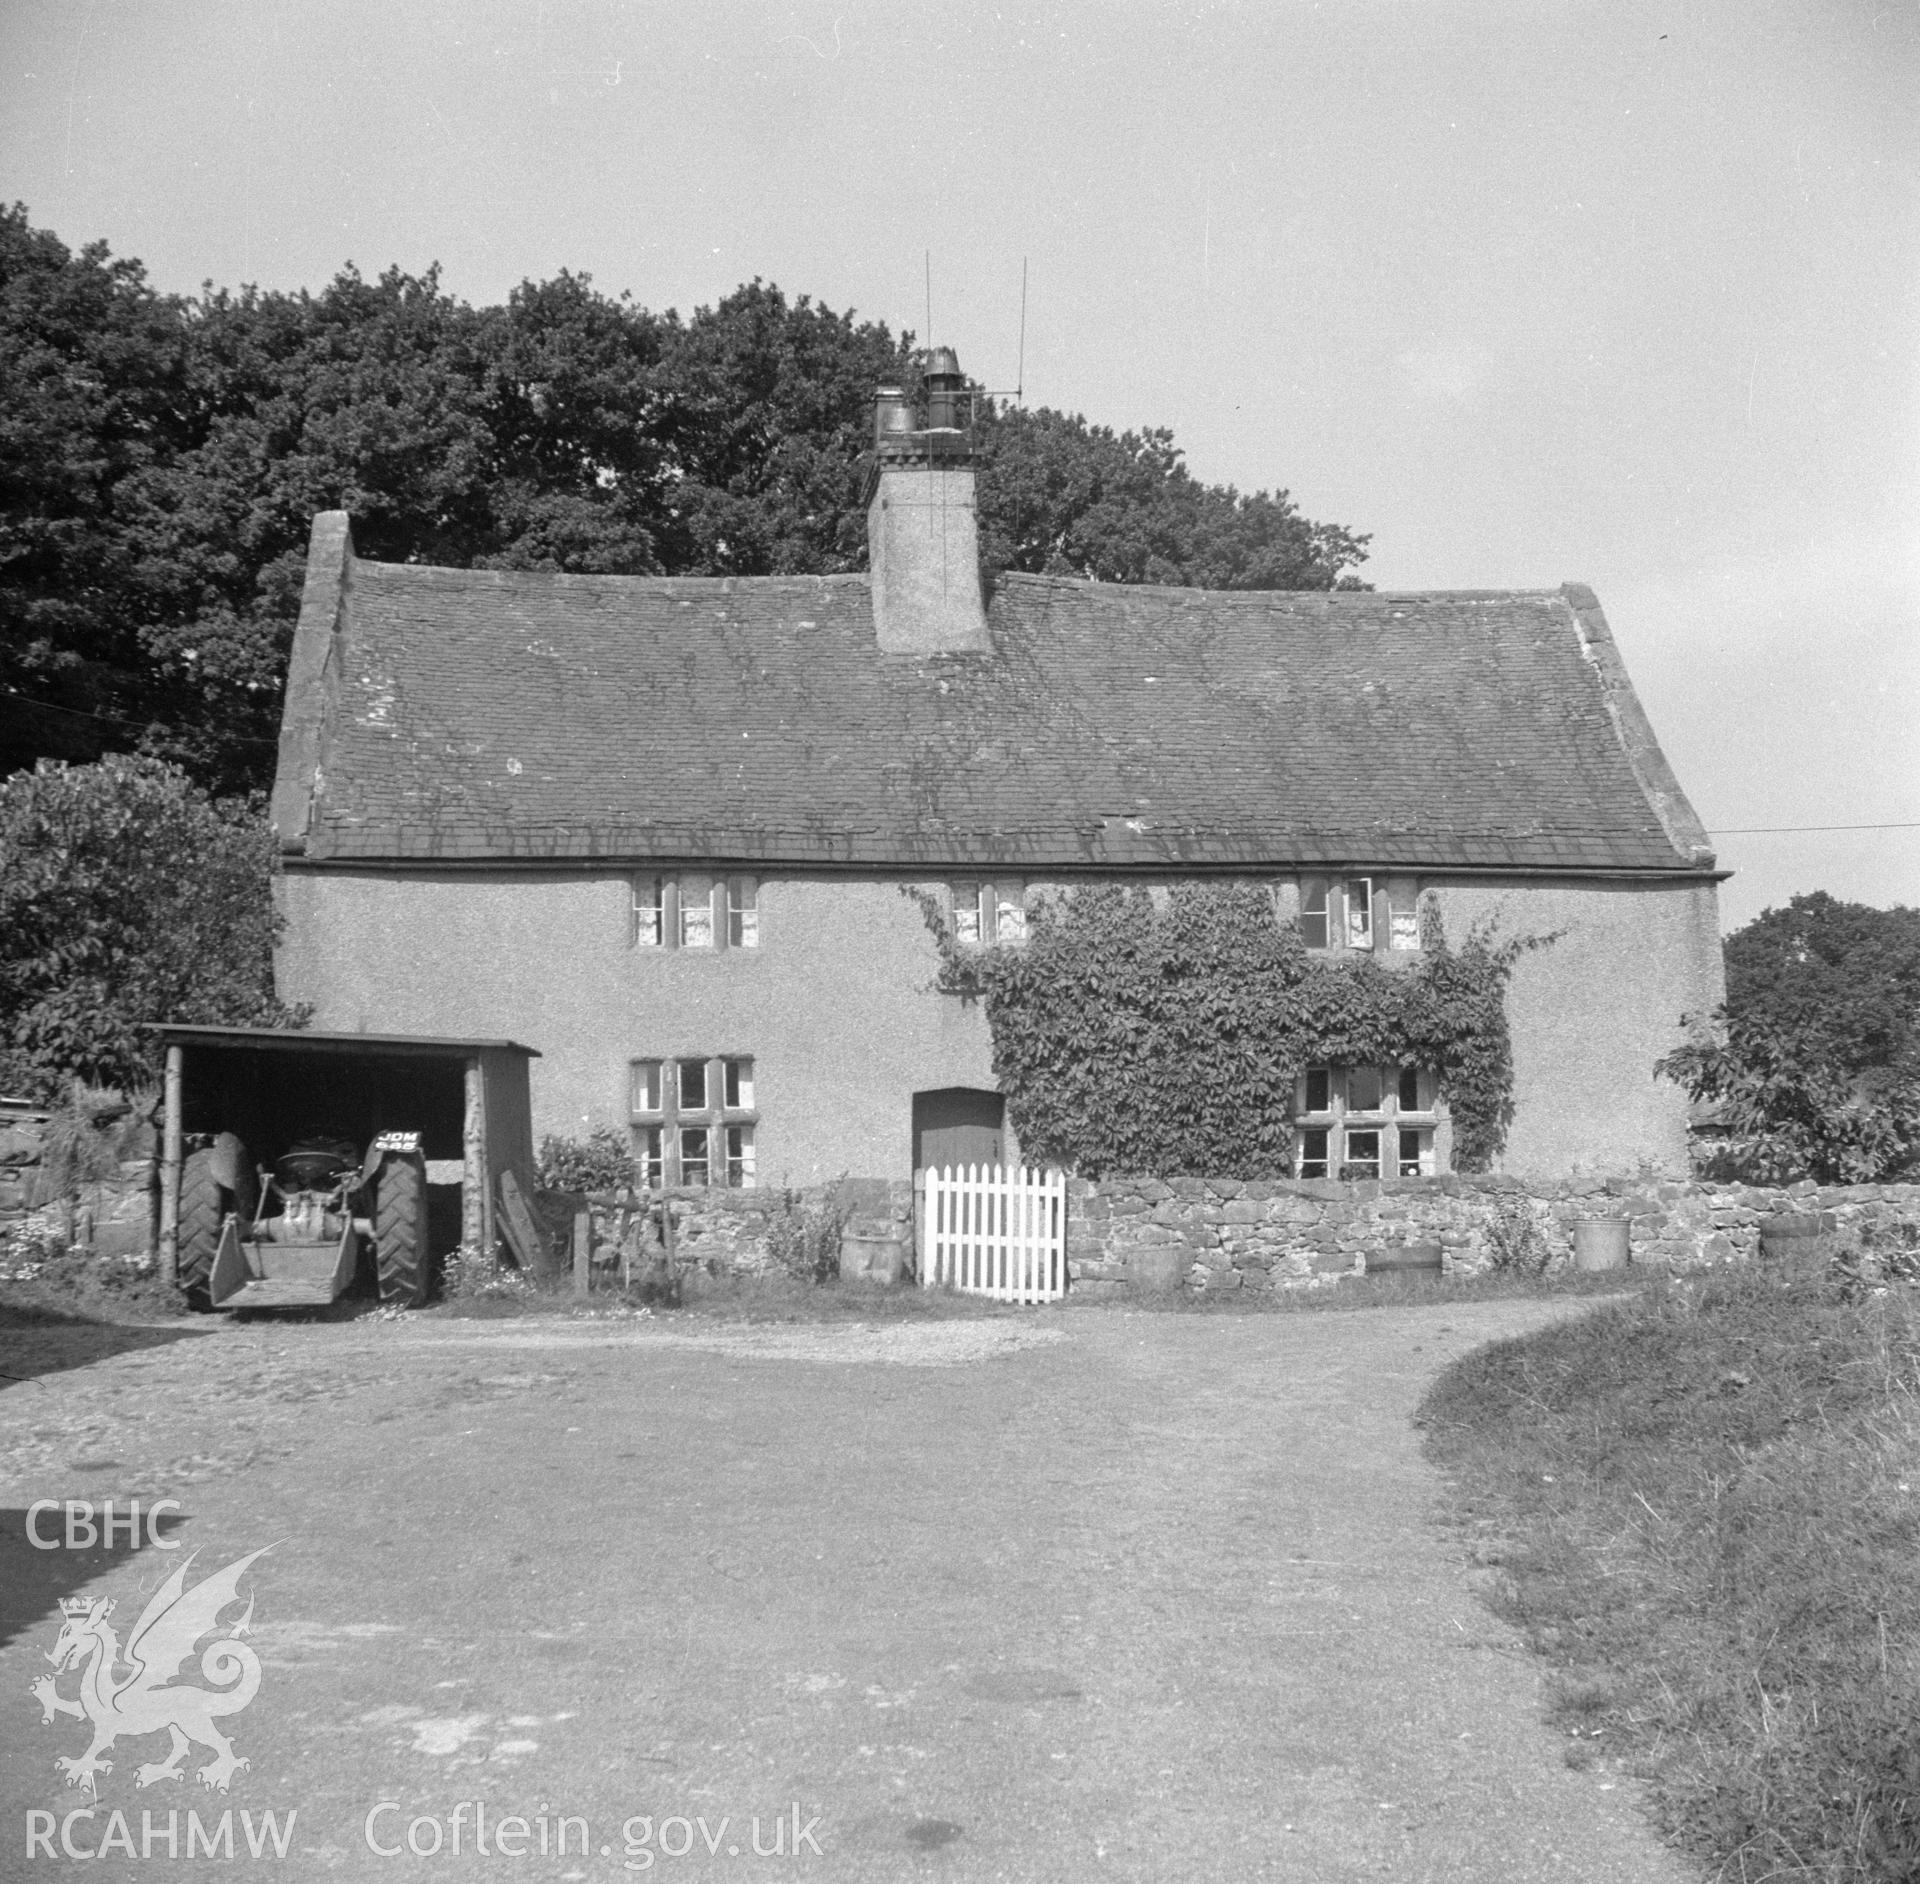 Digital copy of a black and white nitrate negative, exterior view of front elevation of Coed-y-Cra Uchaf.